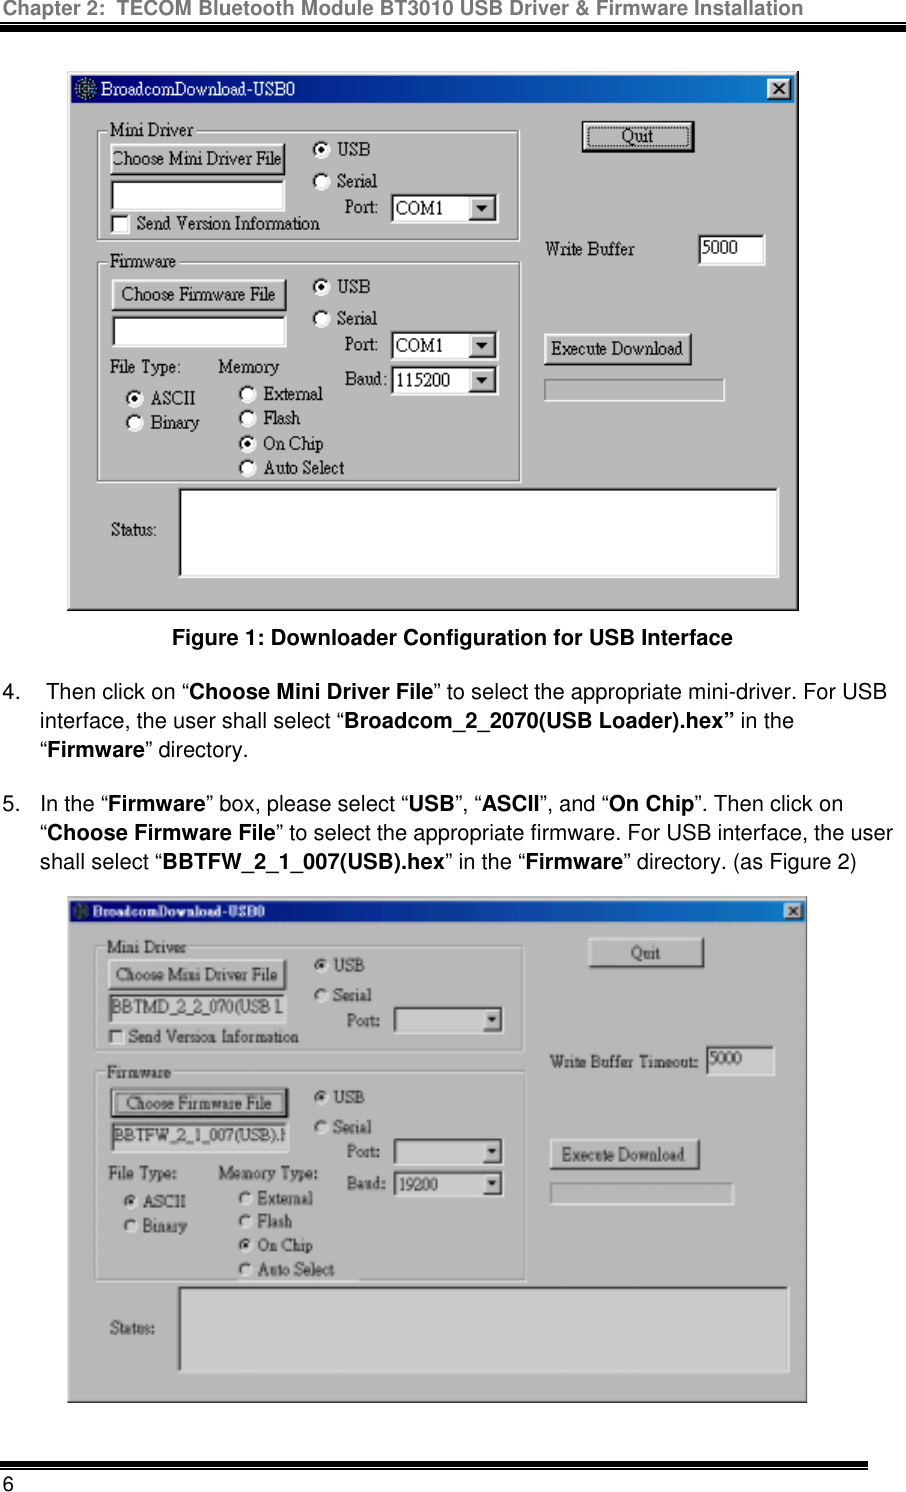 Chapter 2:  TECOM Bluetooth Module BT3010 USB Driver &amp; Firmware Installation  6  Figure 1: Downloader Configuration for USB Interface 4.   Then click on “Choose Mini Driver File” to select the appropriate mini-driver. For USB interface, the user shall select “Broadcom_2_2070(USB Loader).hex” in the “Firmware” directory. 5.  In the “Firmware” box, please select “USB”, “ASCII”, and “On Chip”. Then click on “Choose Firmware File” to select the appropriate firmware. For USB interface, the user shall select “BBTFW_2_1_007(USB).hex” in the “Firmware” directory. (as Figure 2) 